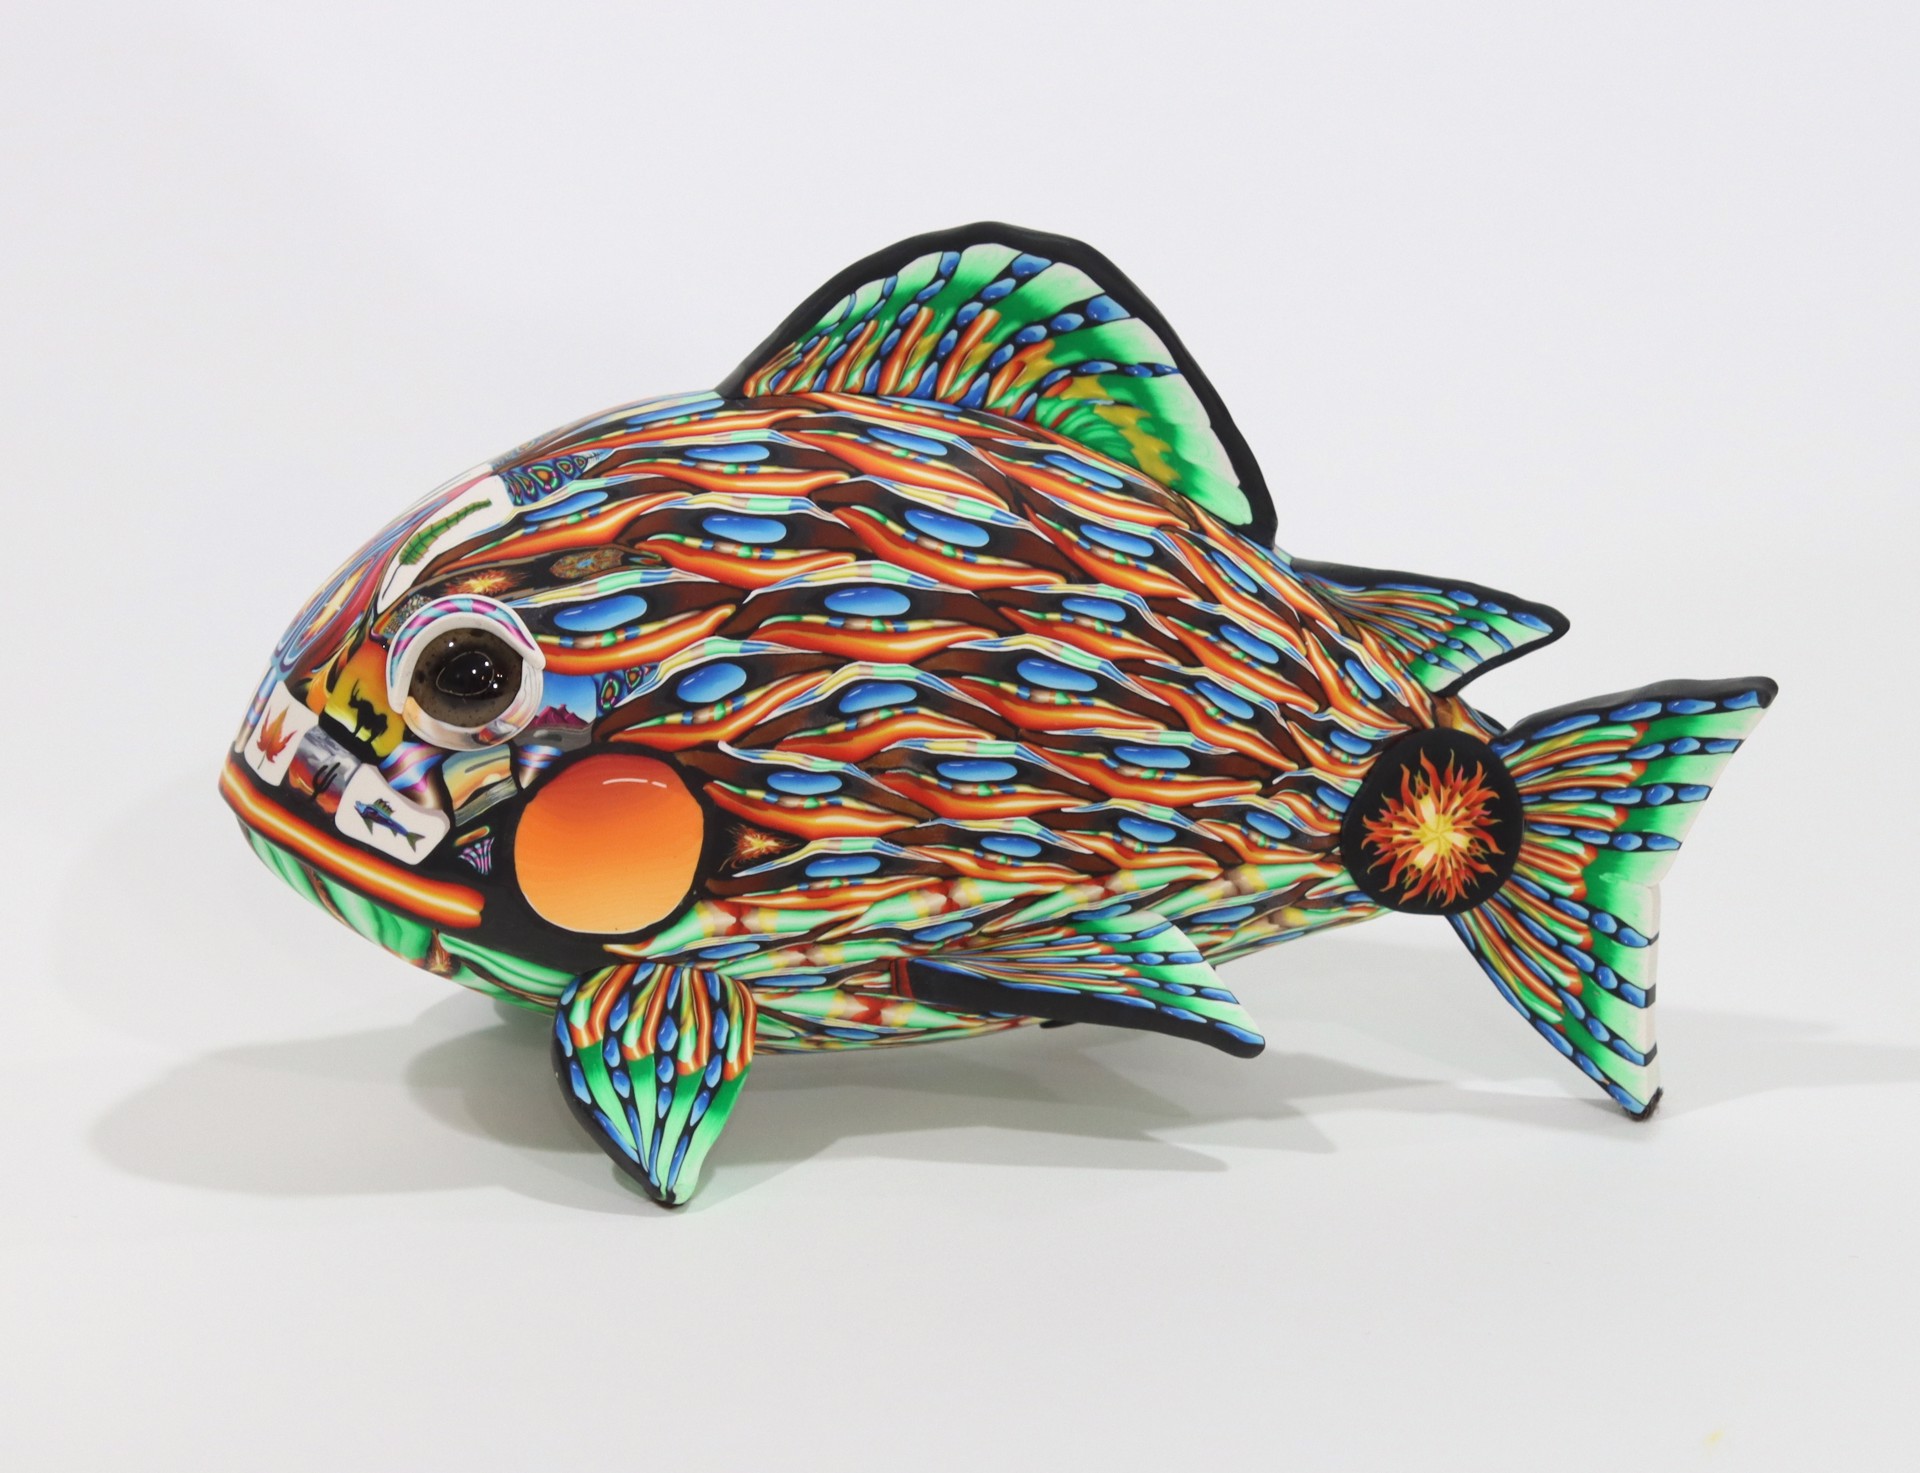 Green and Orange Fish by Adam Thomas Rees